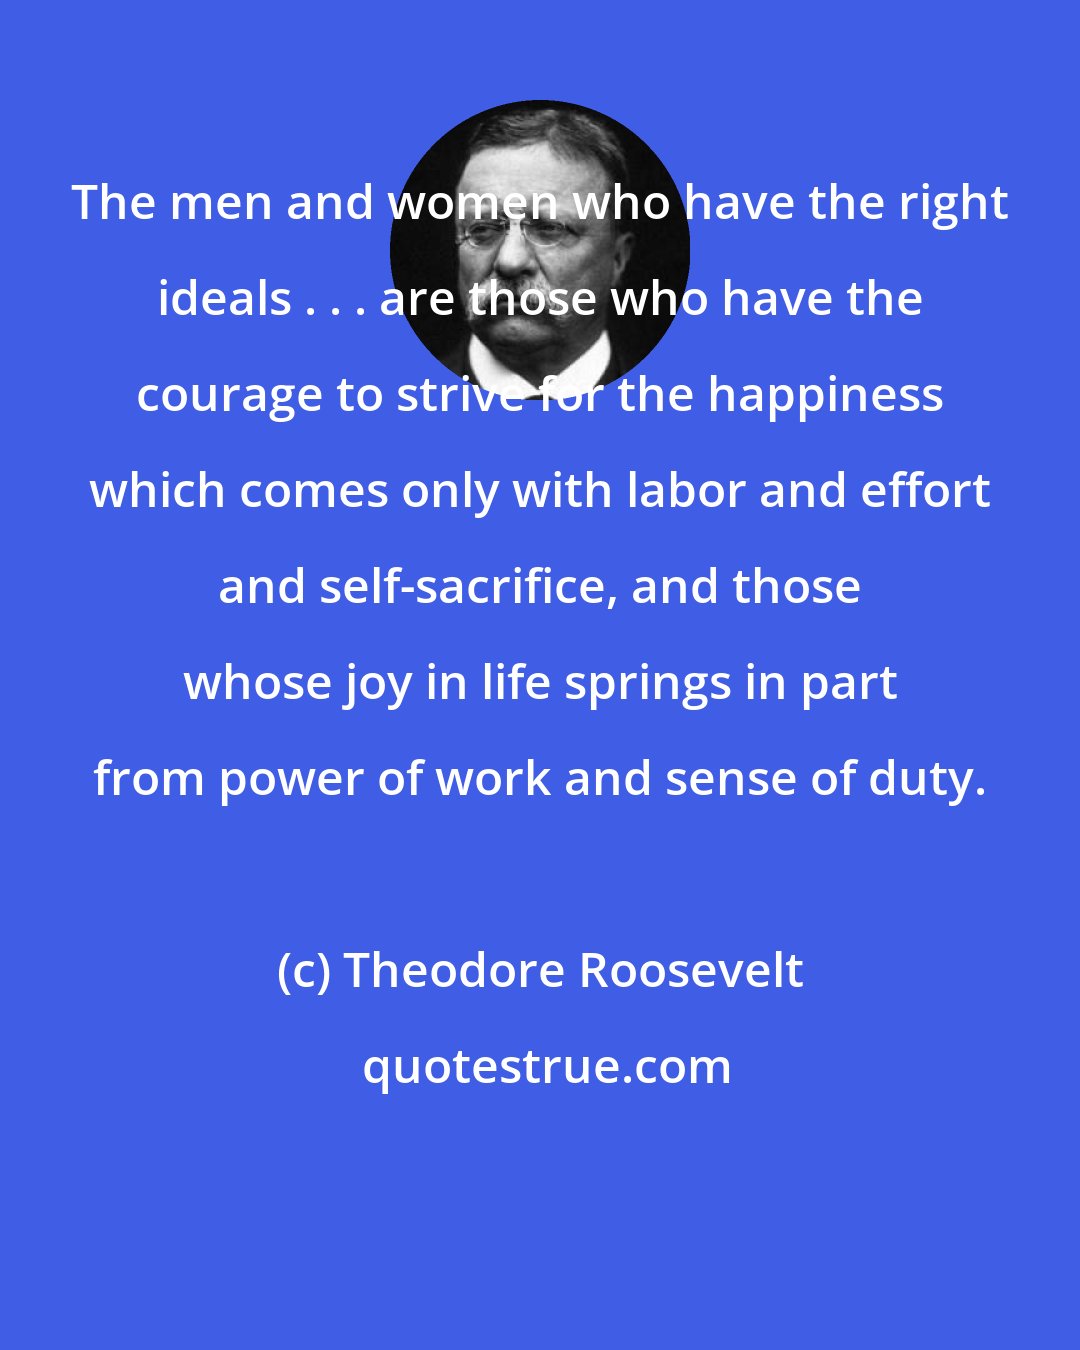 Theodore Roosevelt: The men and women who have the right ideals . . . are those who have the courage to strive for the happiness which comes only with labor and effort and self-sacrifice, and those whose joy in life springs in part from power of work and sense of duty.